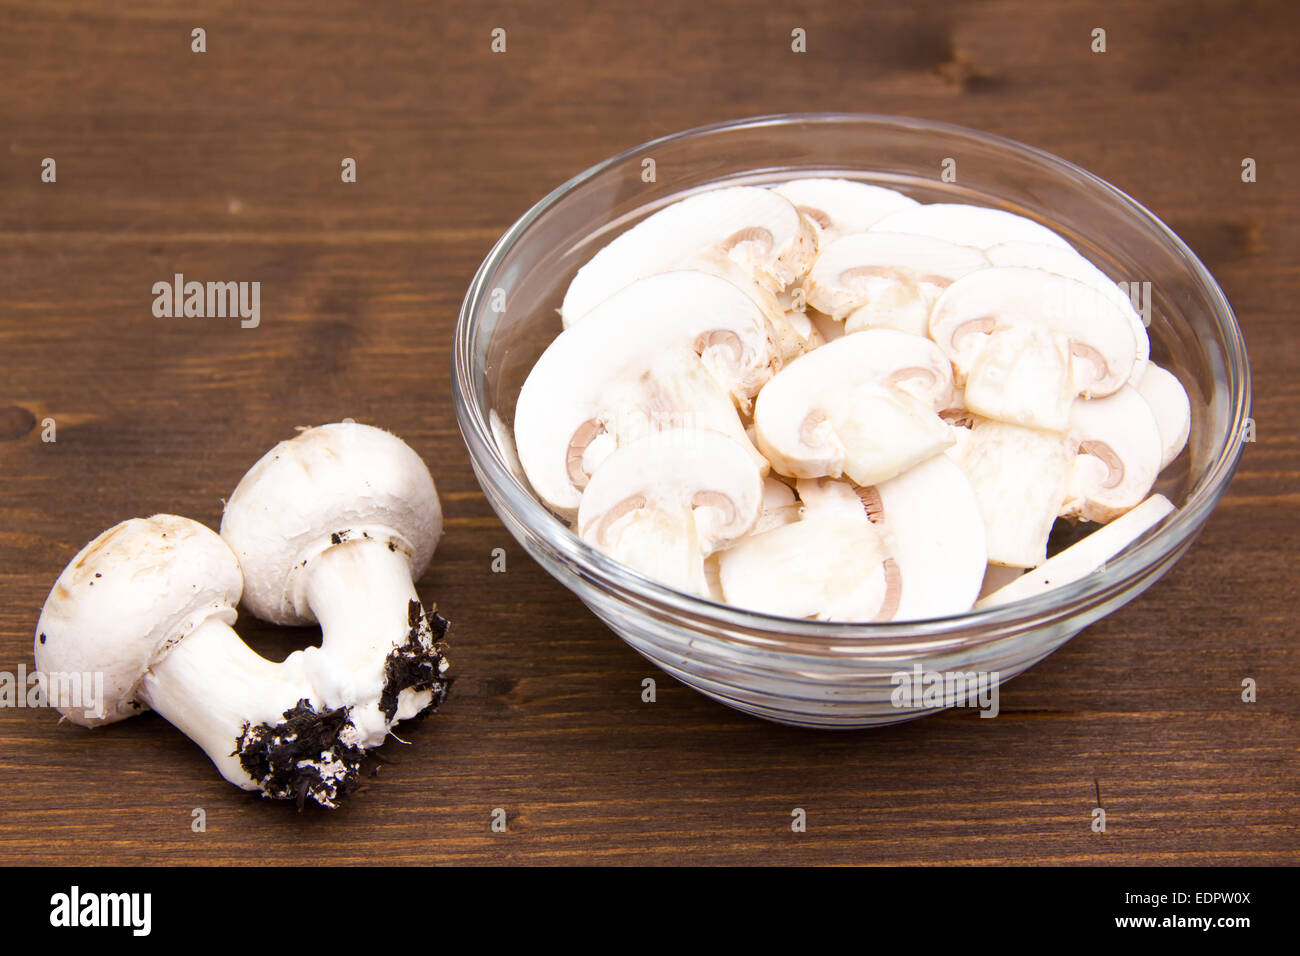 Sliced mushrooms in bowl on wooden table Stock Photo